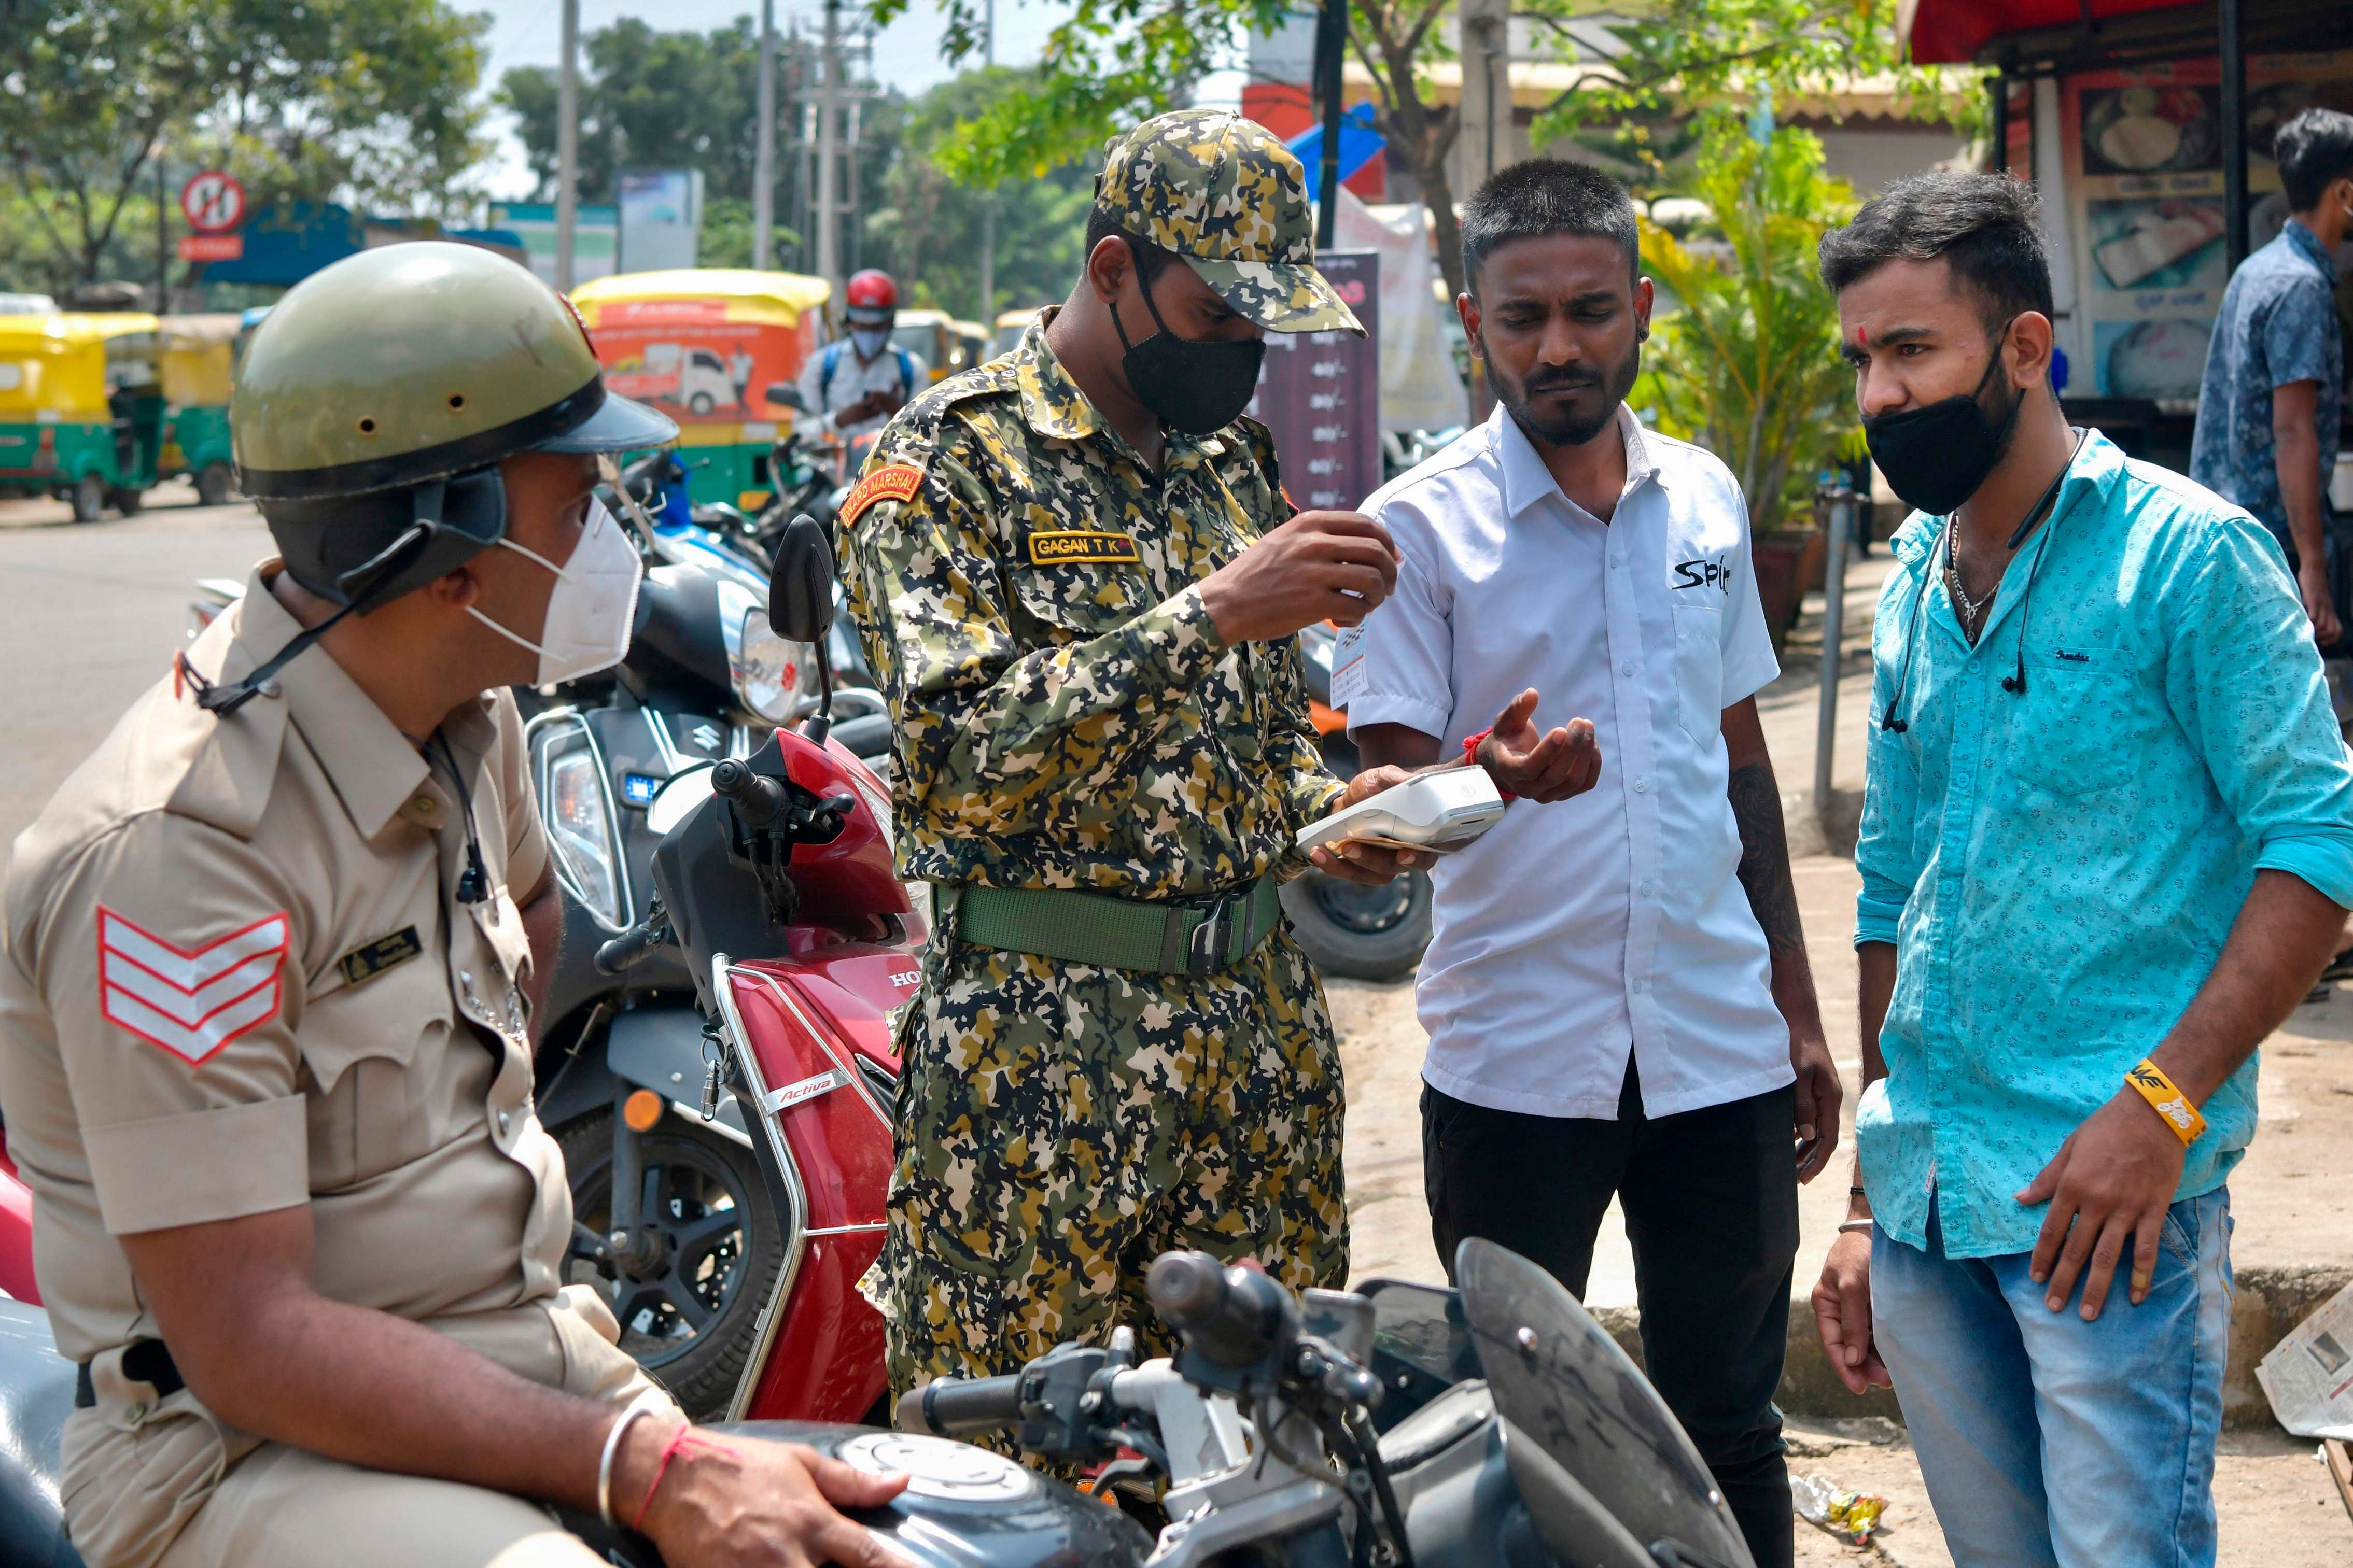 A police officer (L) along with a Bruhath Bengaluru Mahanagara Palike (BBMP) municipal marshal (2L) issue a fine to a man (2R) for not wearing a face mask amidst the Covid-19 pandemic in Bengaluru. Credit: AFP Photo